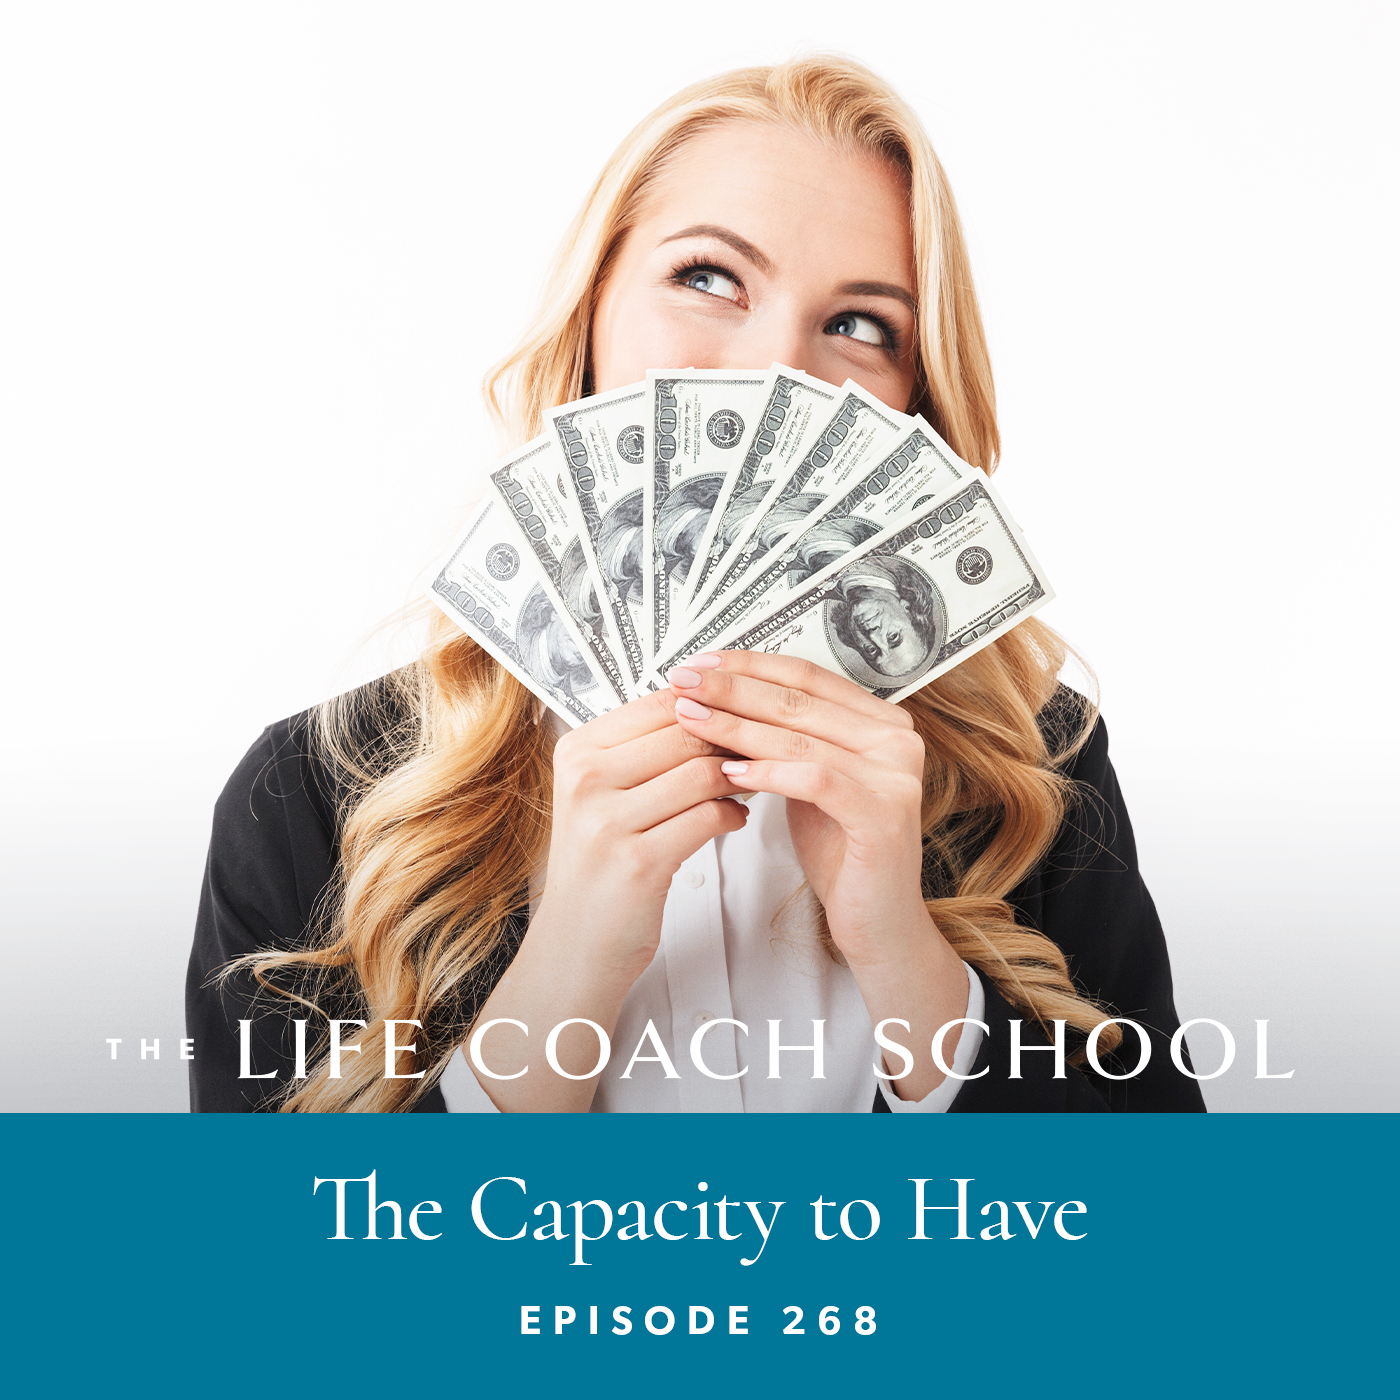 The Life Coach School Podcast with Brooke Castillo | Episode 268 | The Capacity to Have